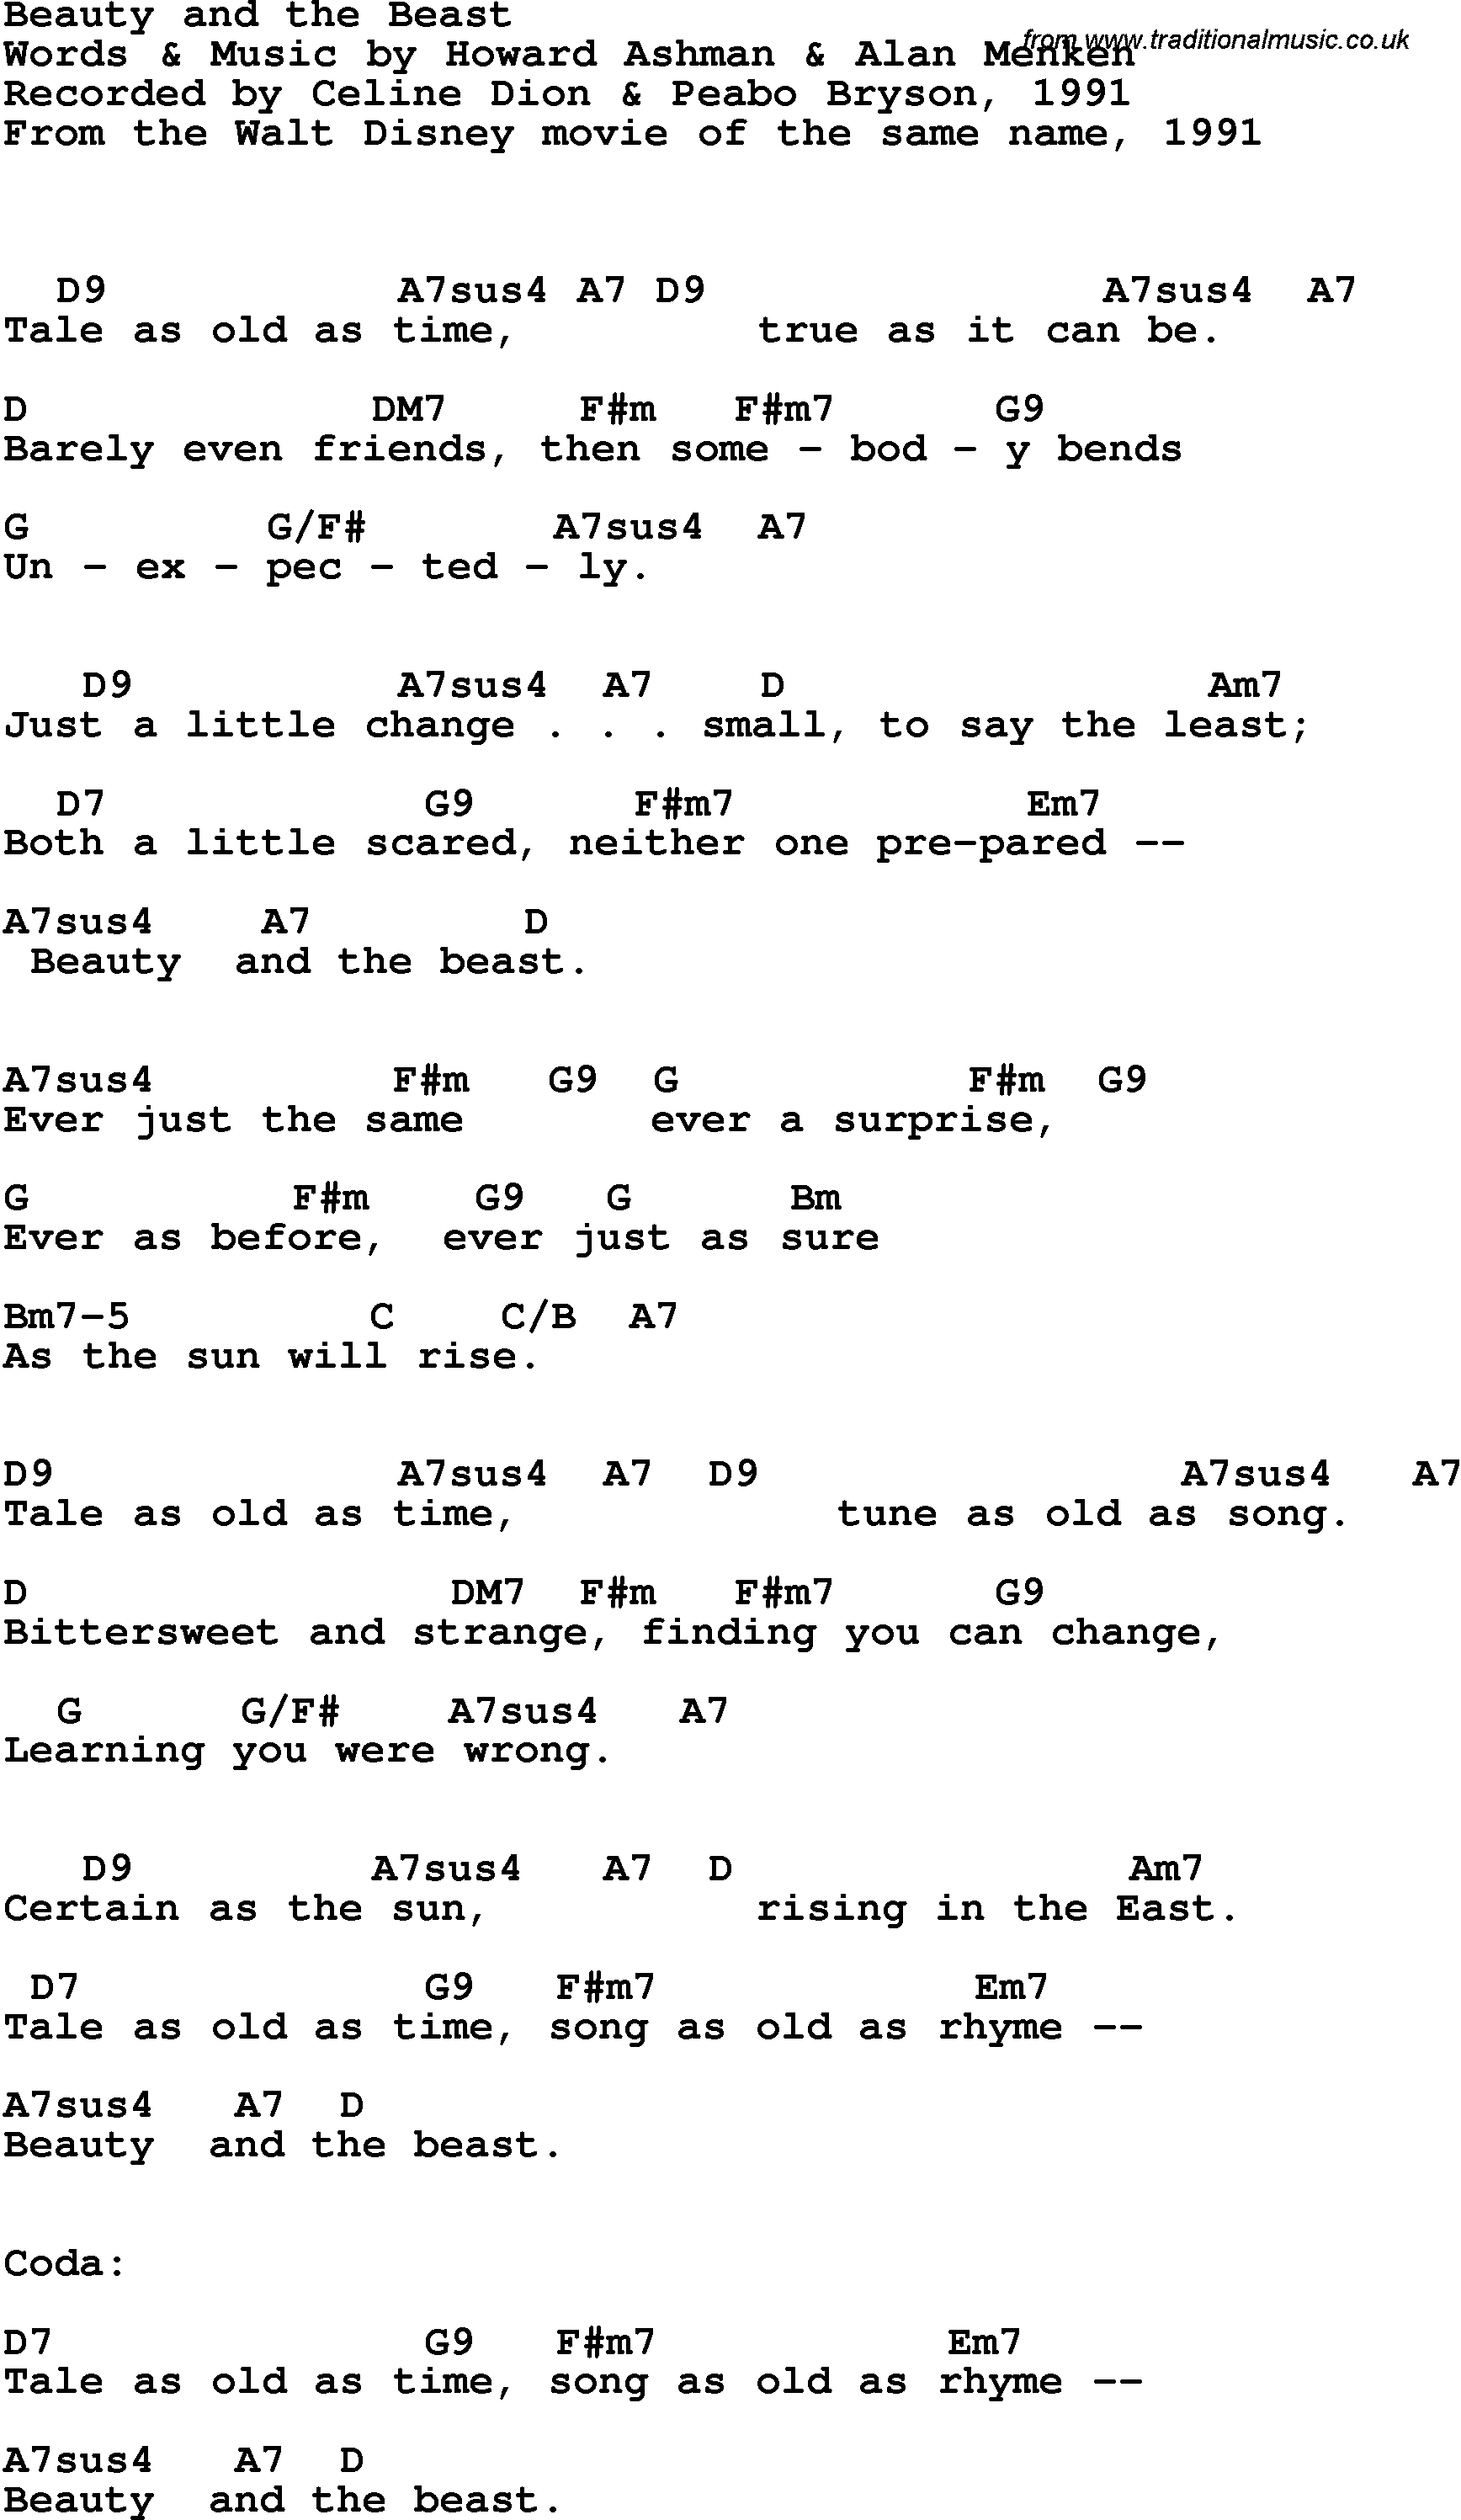 Song Lyrics with guitar chords for Beauty And The Beast - Howard Ashman & Alan Menken